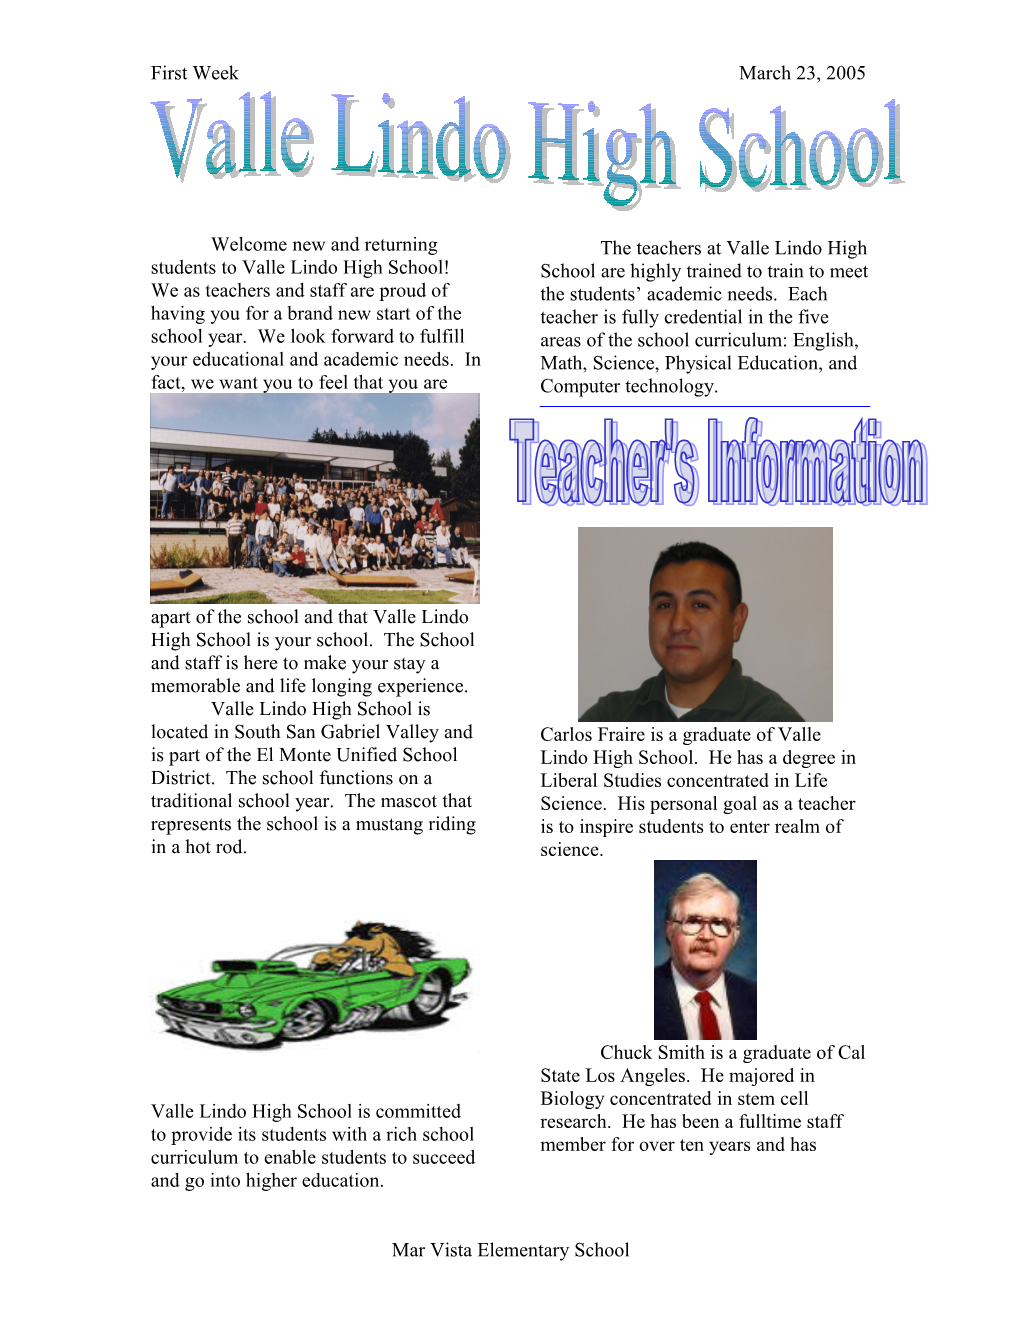 Welcome New and Returning Students to Valle Lindo High School! We As Teachers and Staff